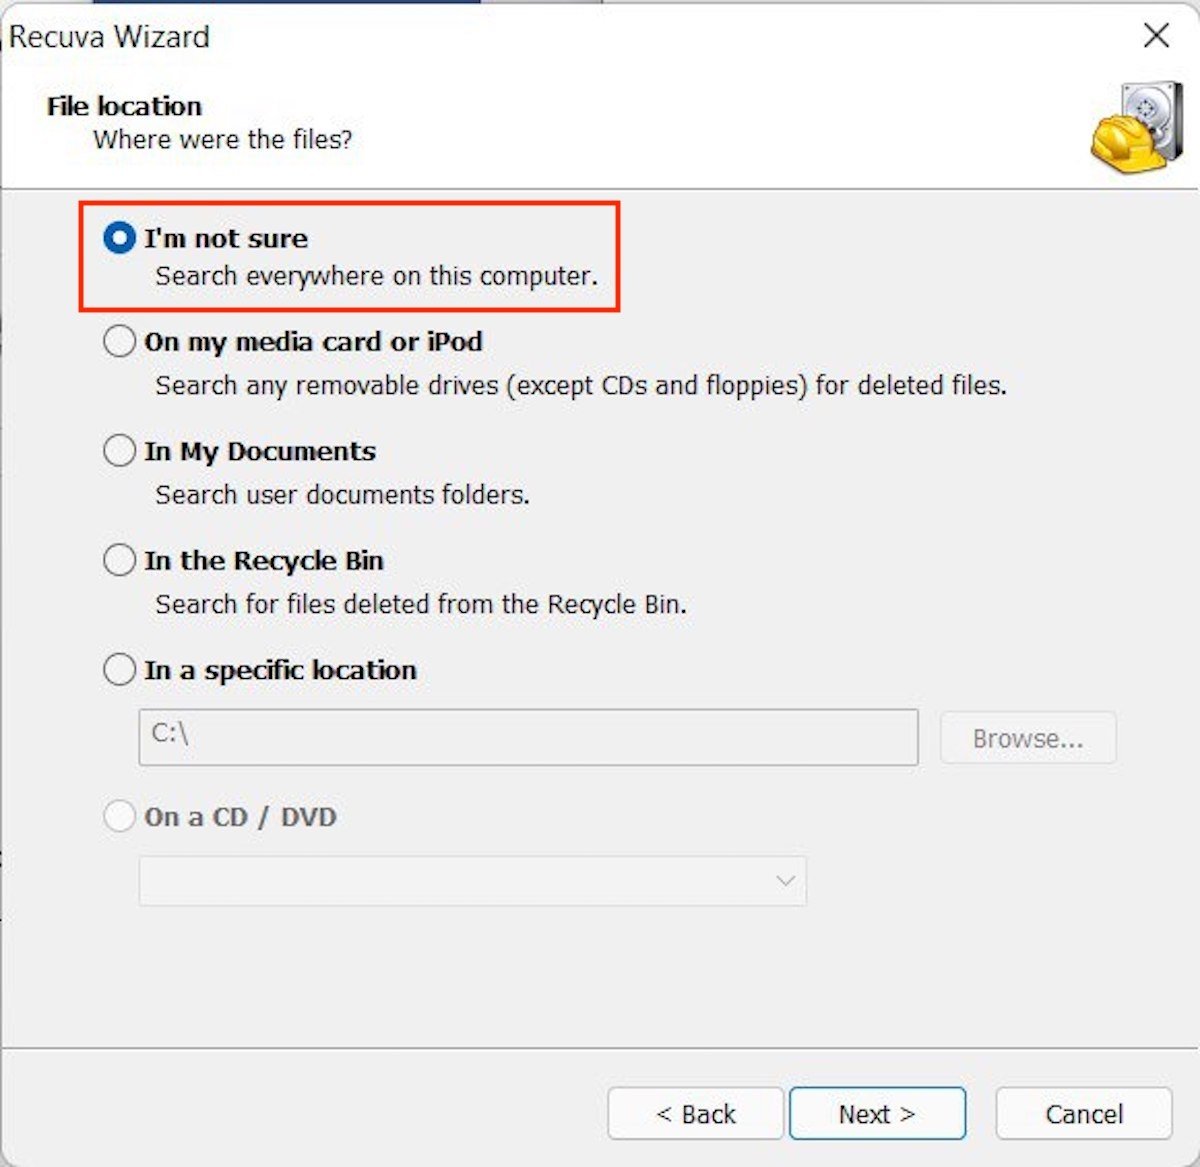 Specify the location where you want Recuva to search for deleted files